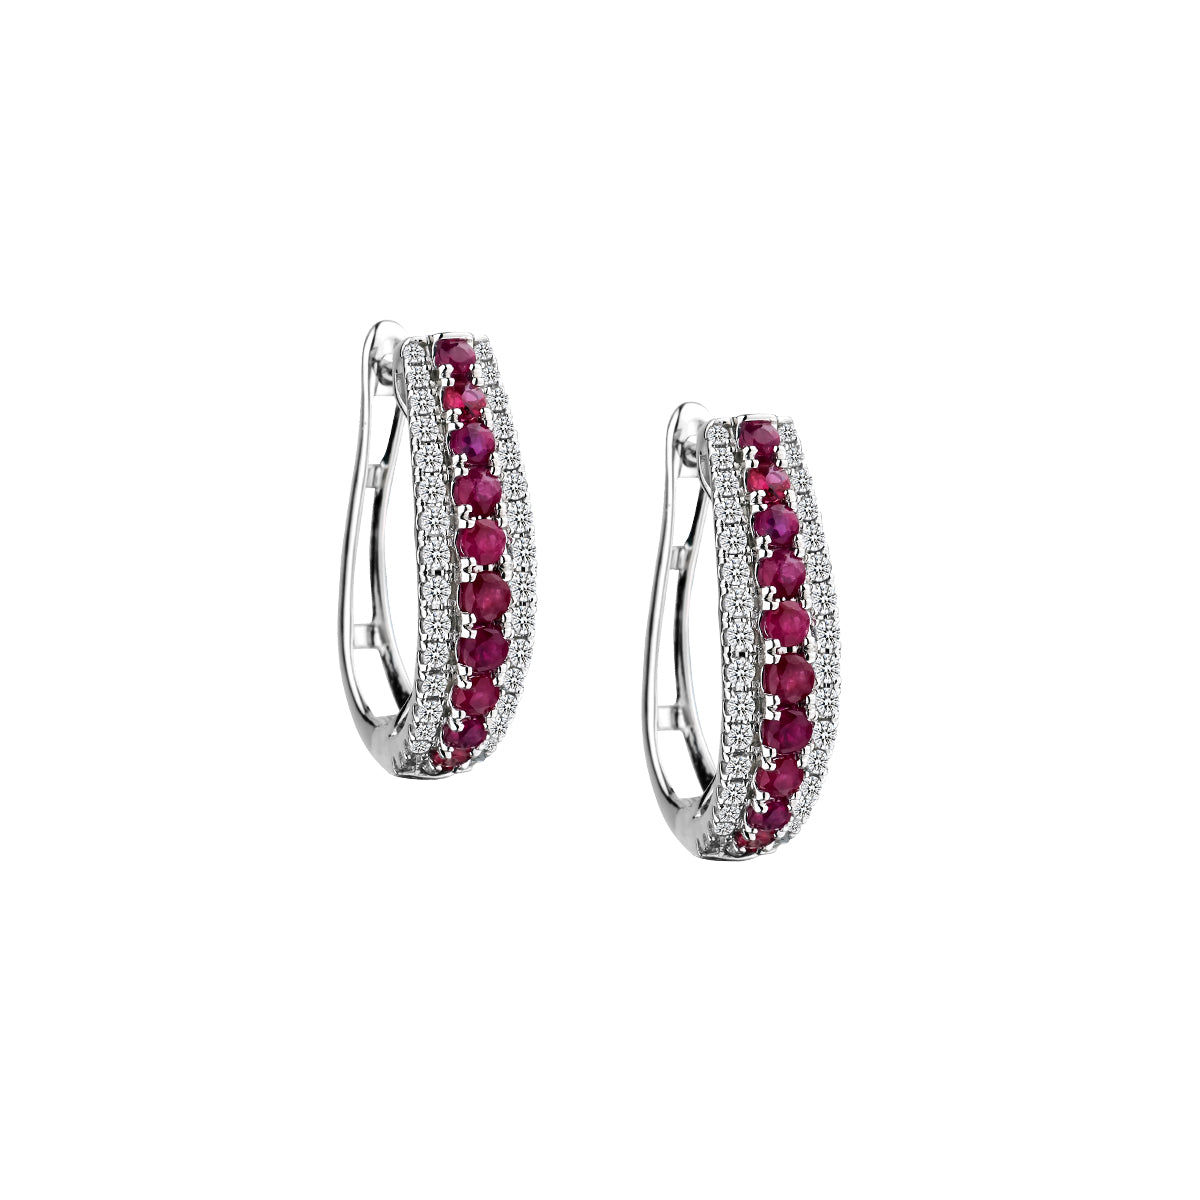 Genuine Ruby and .75 Carat Diamond Earrings, 10kt White Gold and 14kt White Gold Post.......................NOW